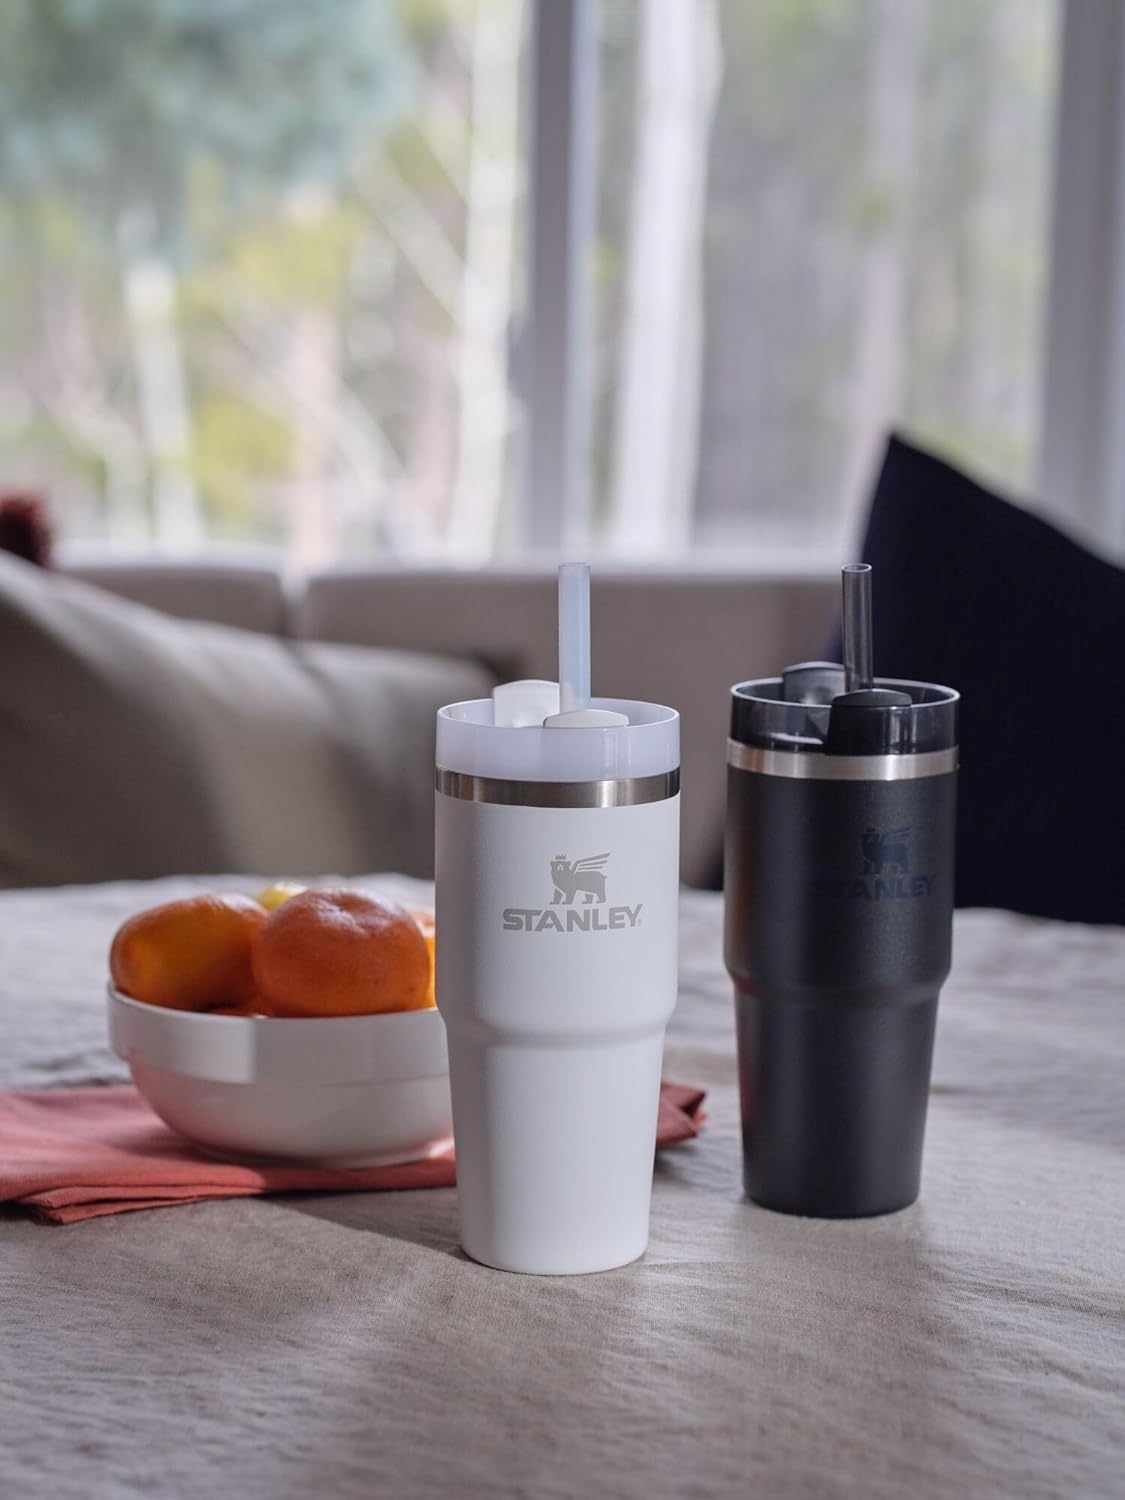 Two Stanley insulated tumblers on a table, one white and one black, with straws. Bowl of oranges in the background